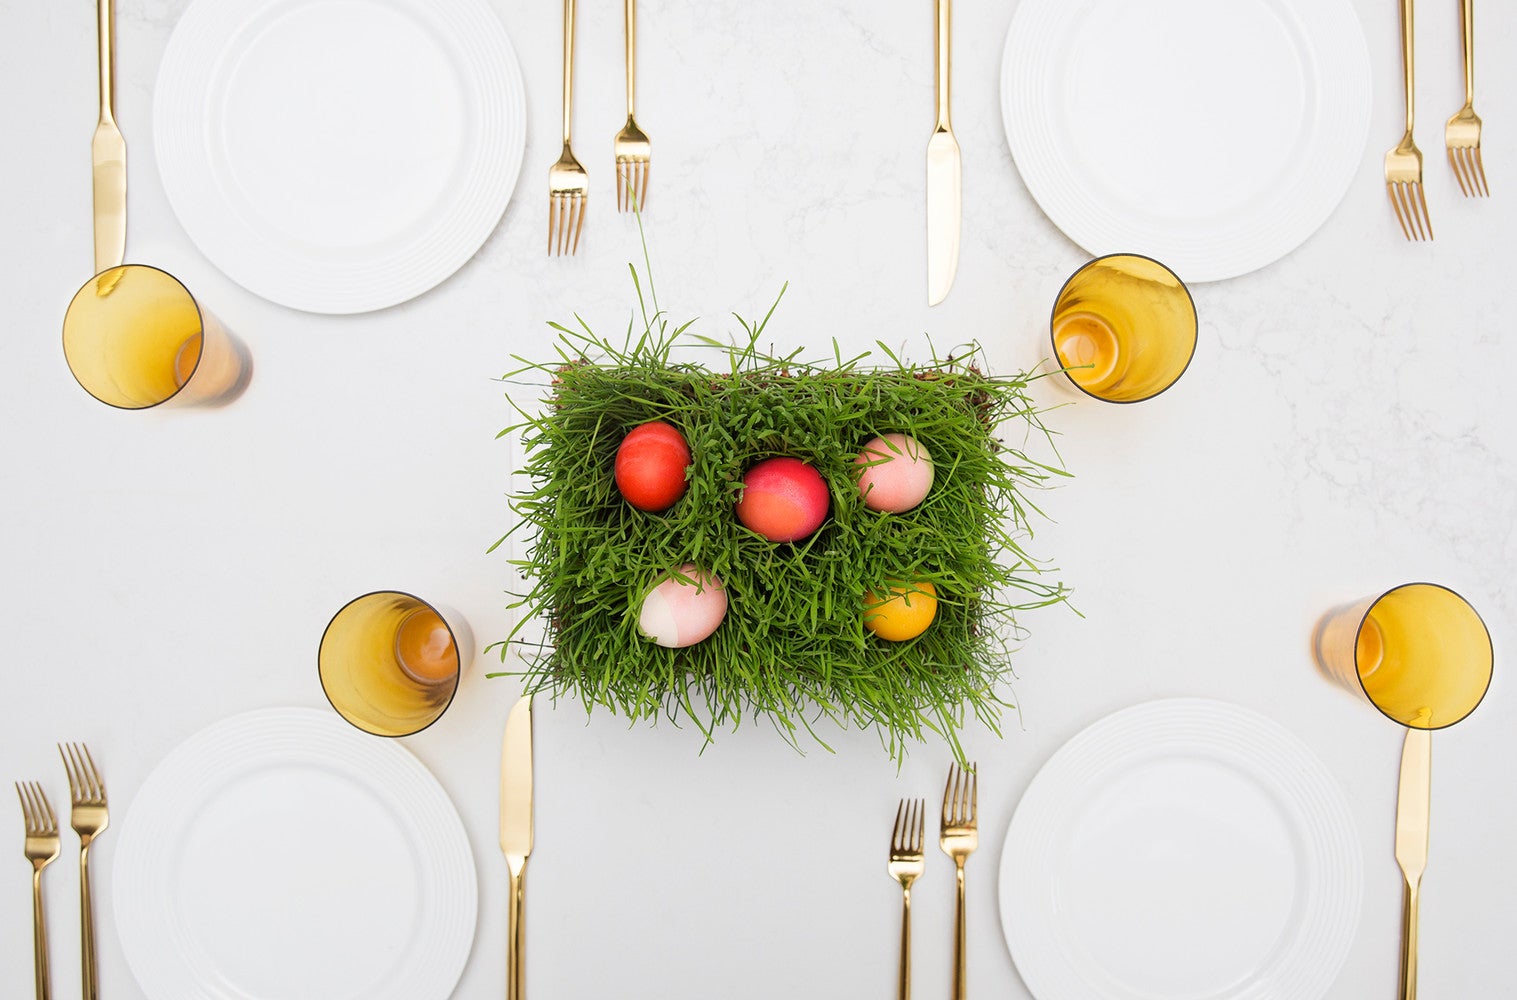 Three Stunning Centerpiece Ideas That Will Make Your Easter Table